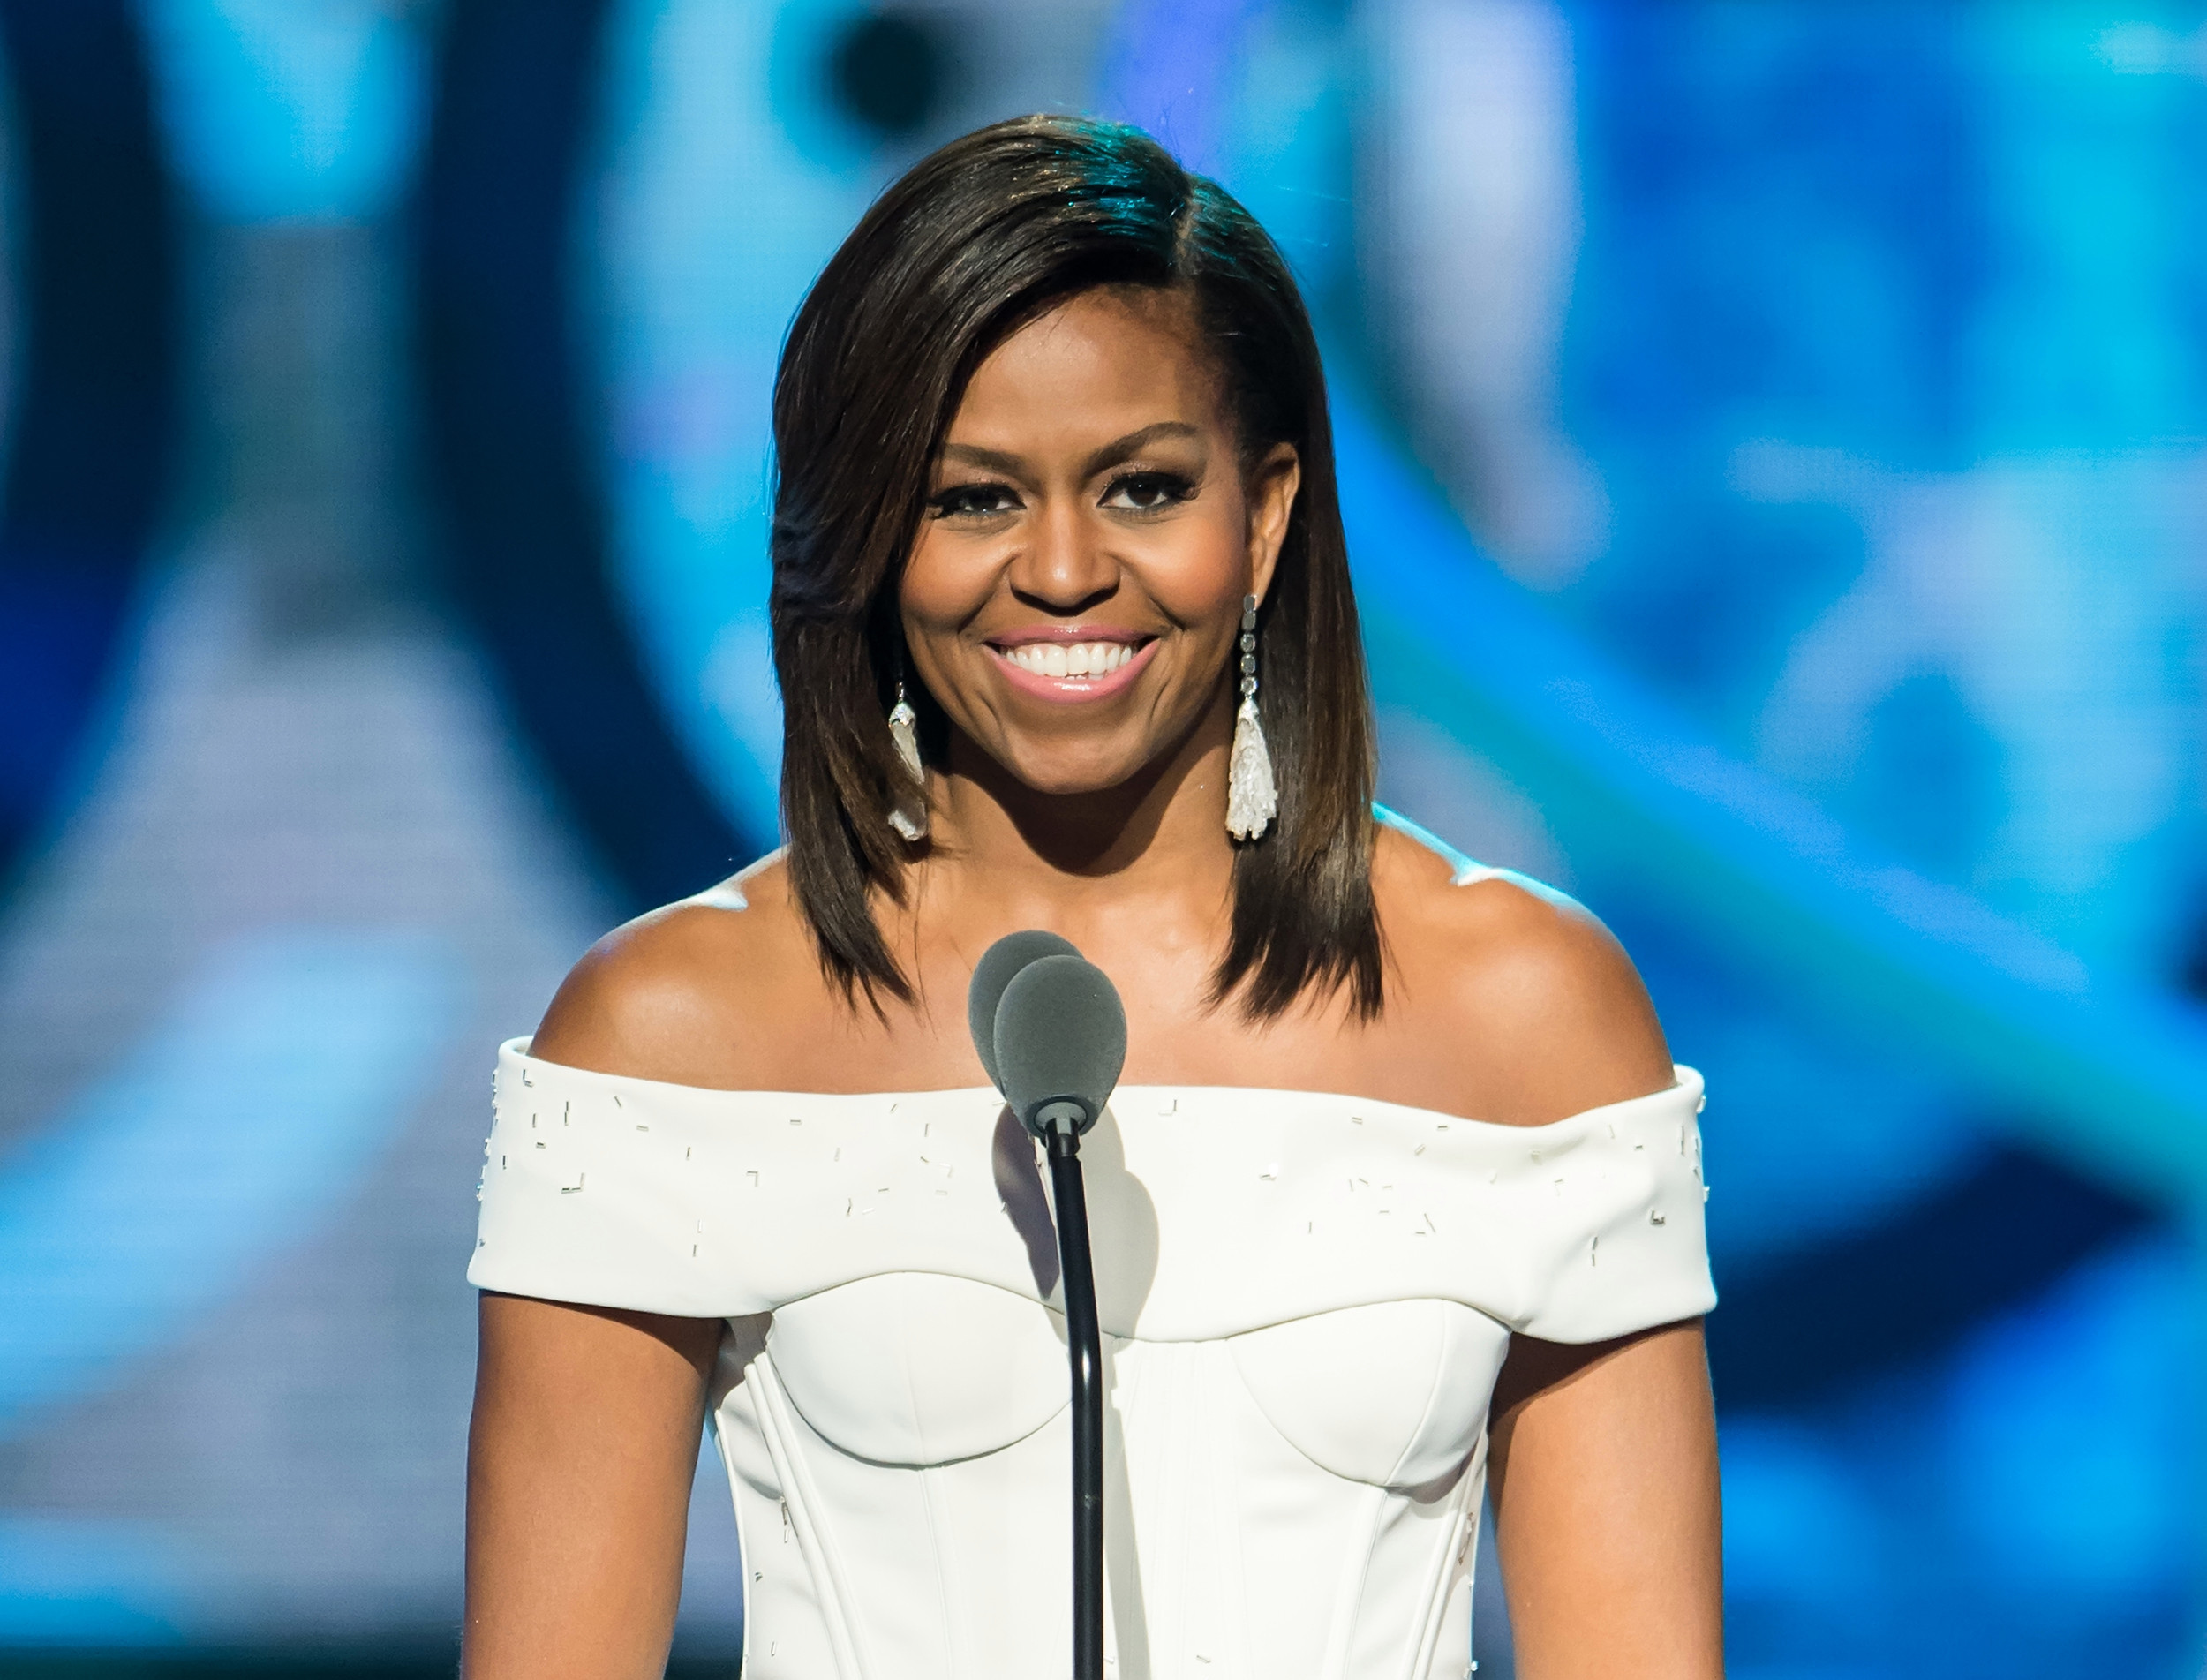 Michelle Obama Bags Grammy Award In Competitive Category